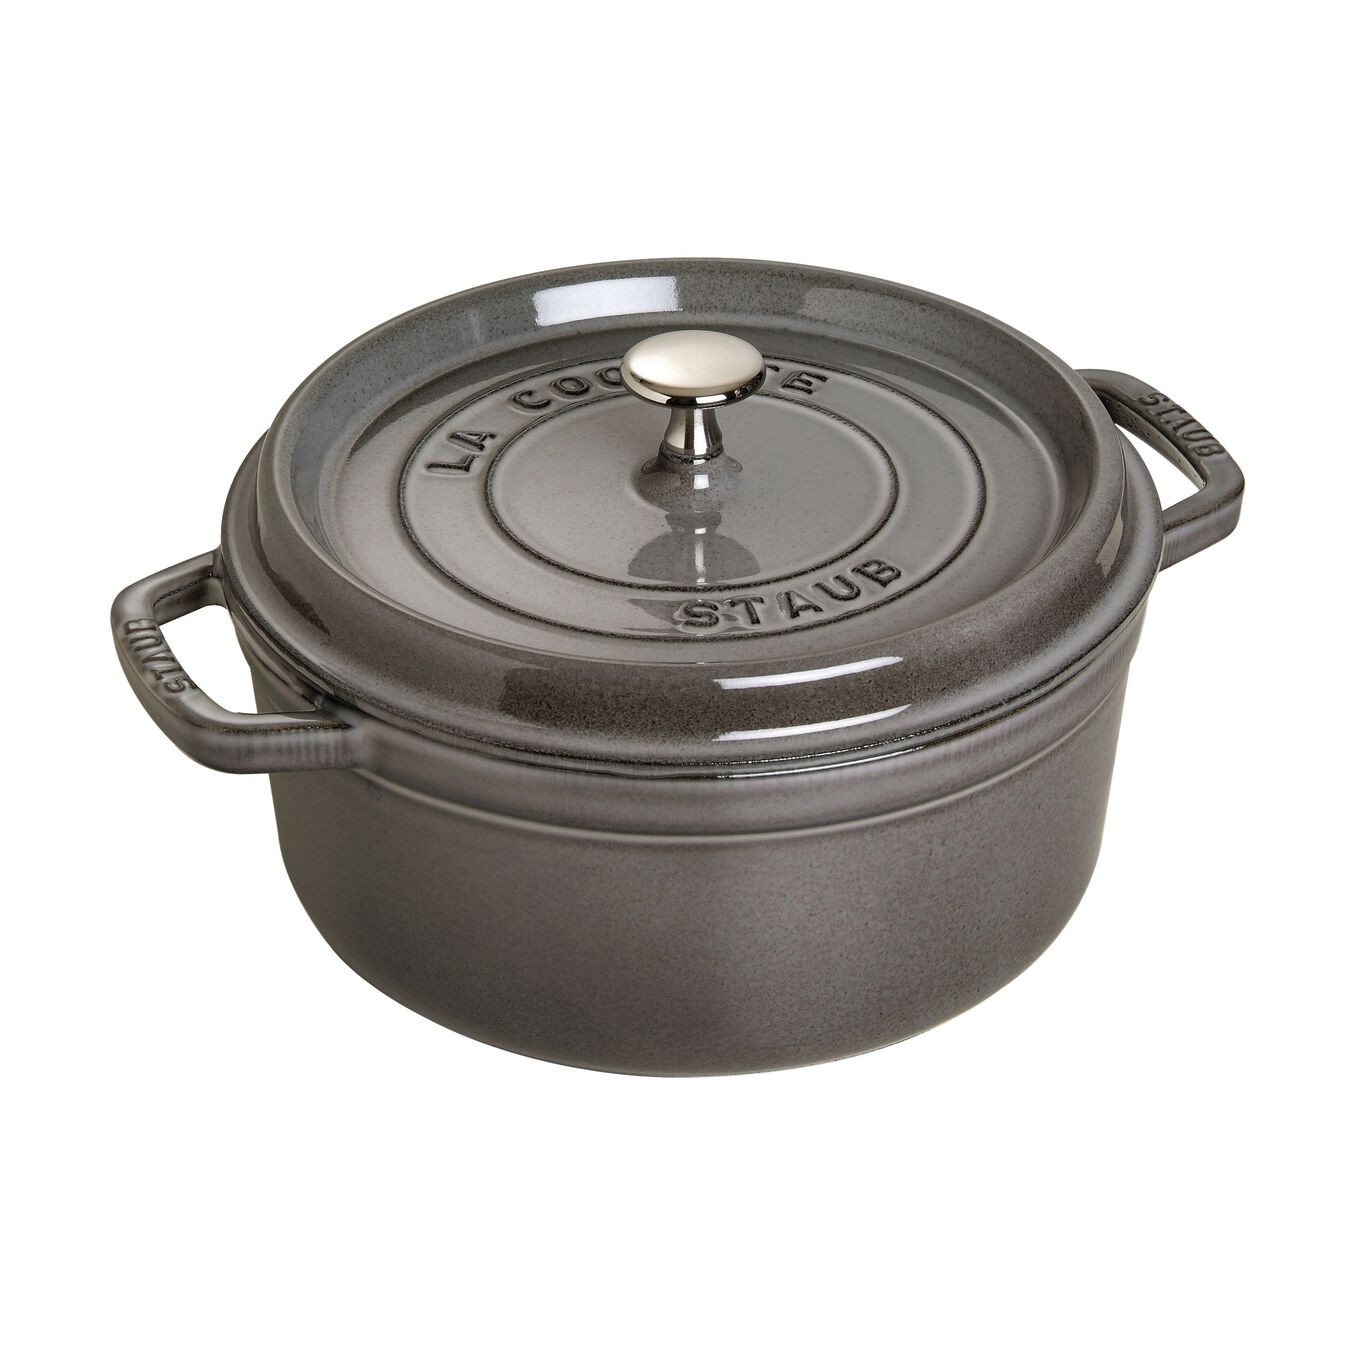 3.8 l cast iron round Cocotte, graphite-grey - Visual Imperfections,,large 1